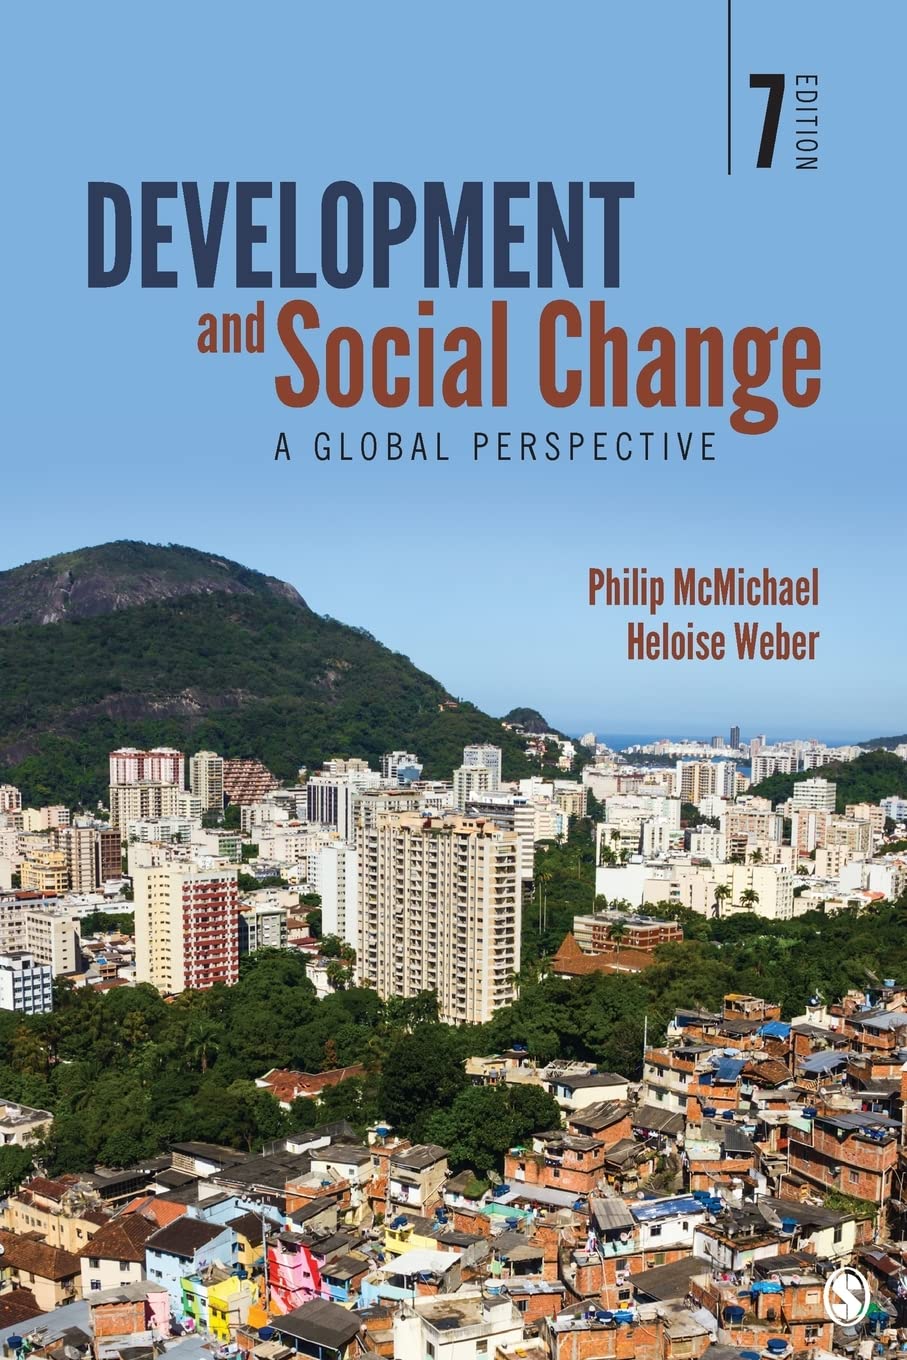 test bank for Development and Social Change, McMichael,7e